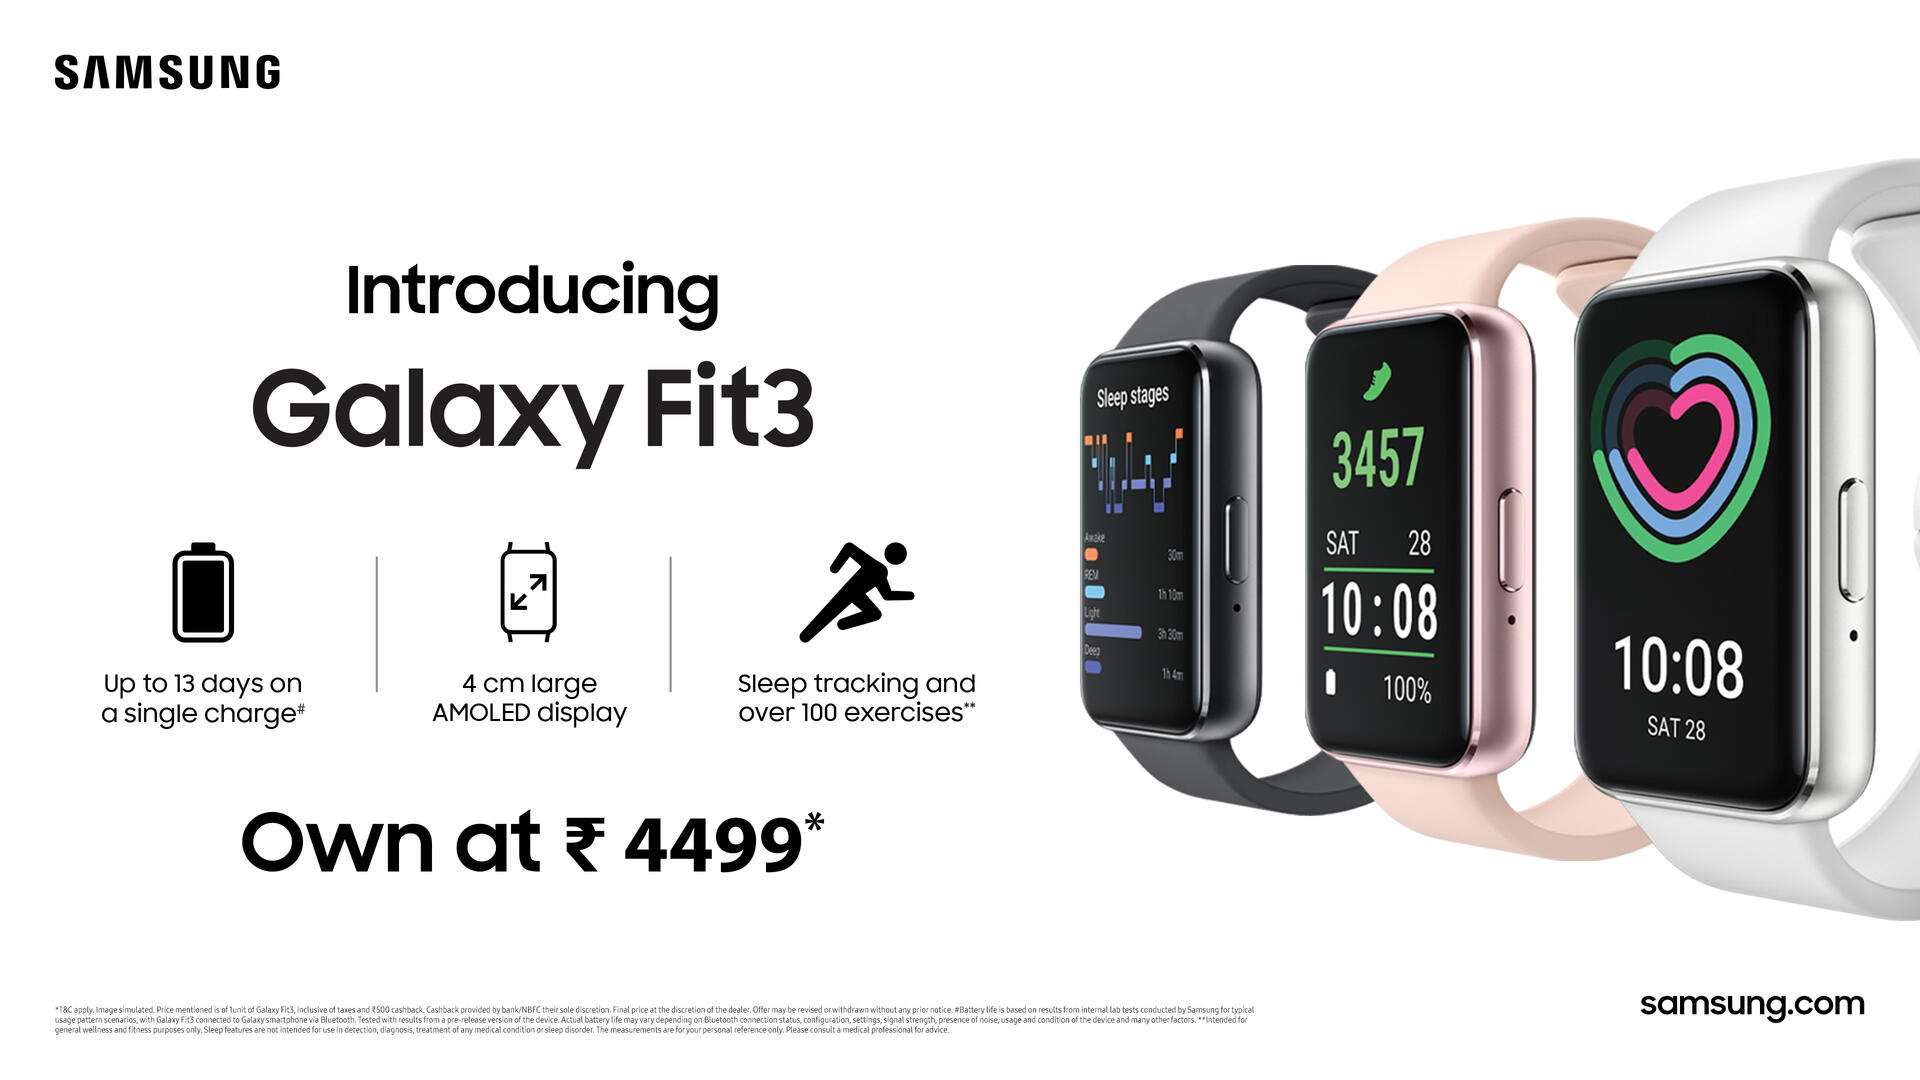 Stay Motivated to Be Your Best with All-New Samsung Galaxy Fit3